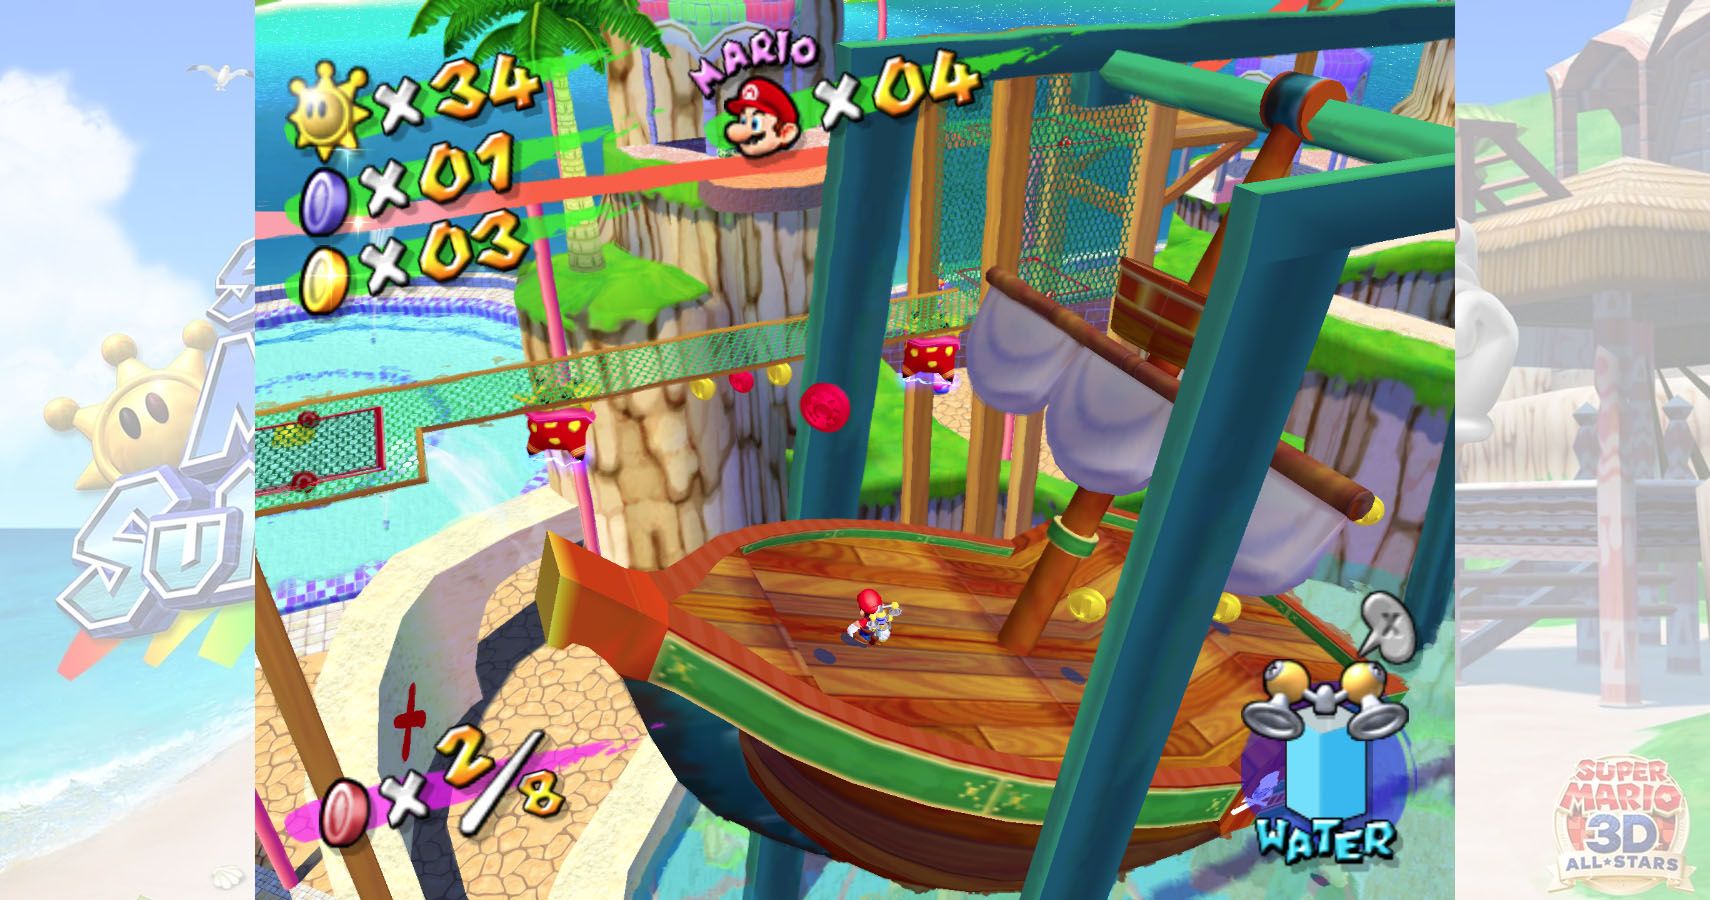 Mario jumping to collect red coins on pirate ships in pinna park.